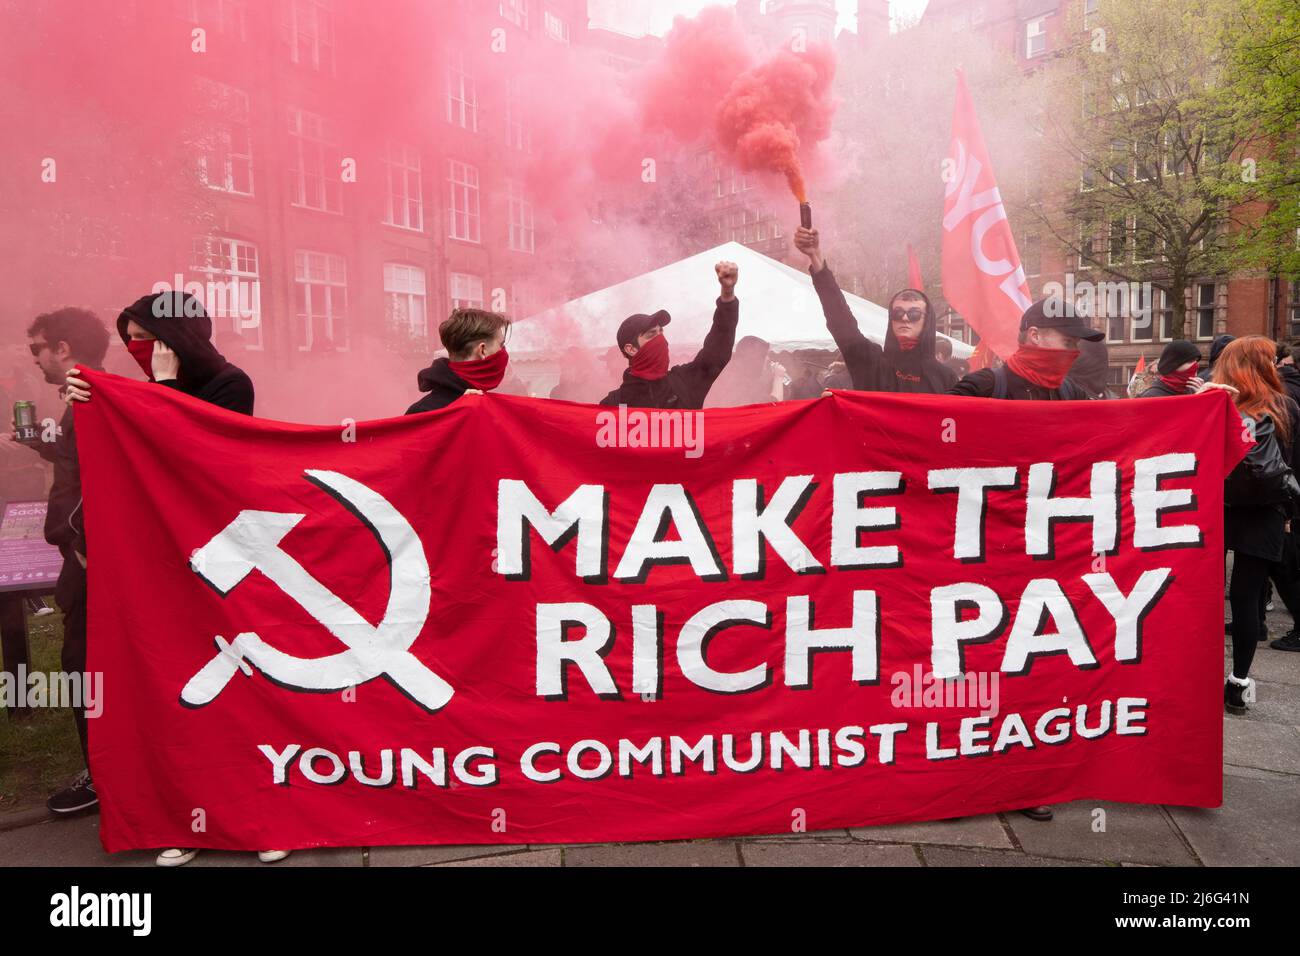 Young Communist league at Manchester May Day on Sunday 1 May. Workers assembled at 11:15am in St Peter's Square for march at 11:30am to Sackville Gardens for 1pm for the festival of speeches including from council leader Bev Craig , live music, food, drink and stalls. Credit: GaryRobertsphotography/Alamy Live News Stock Photo